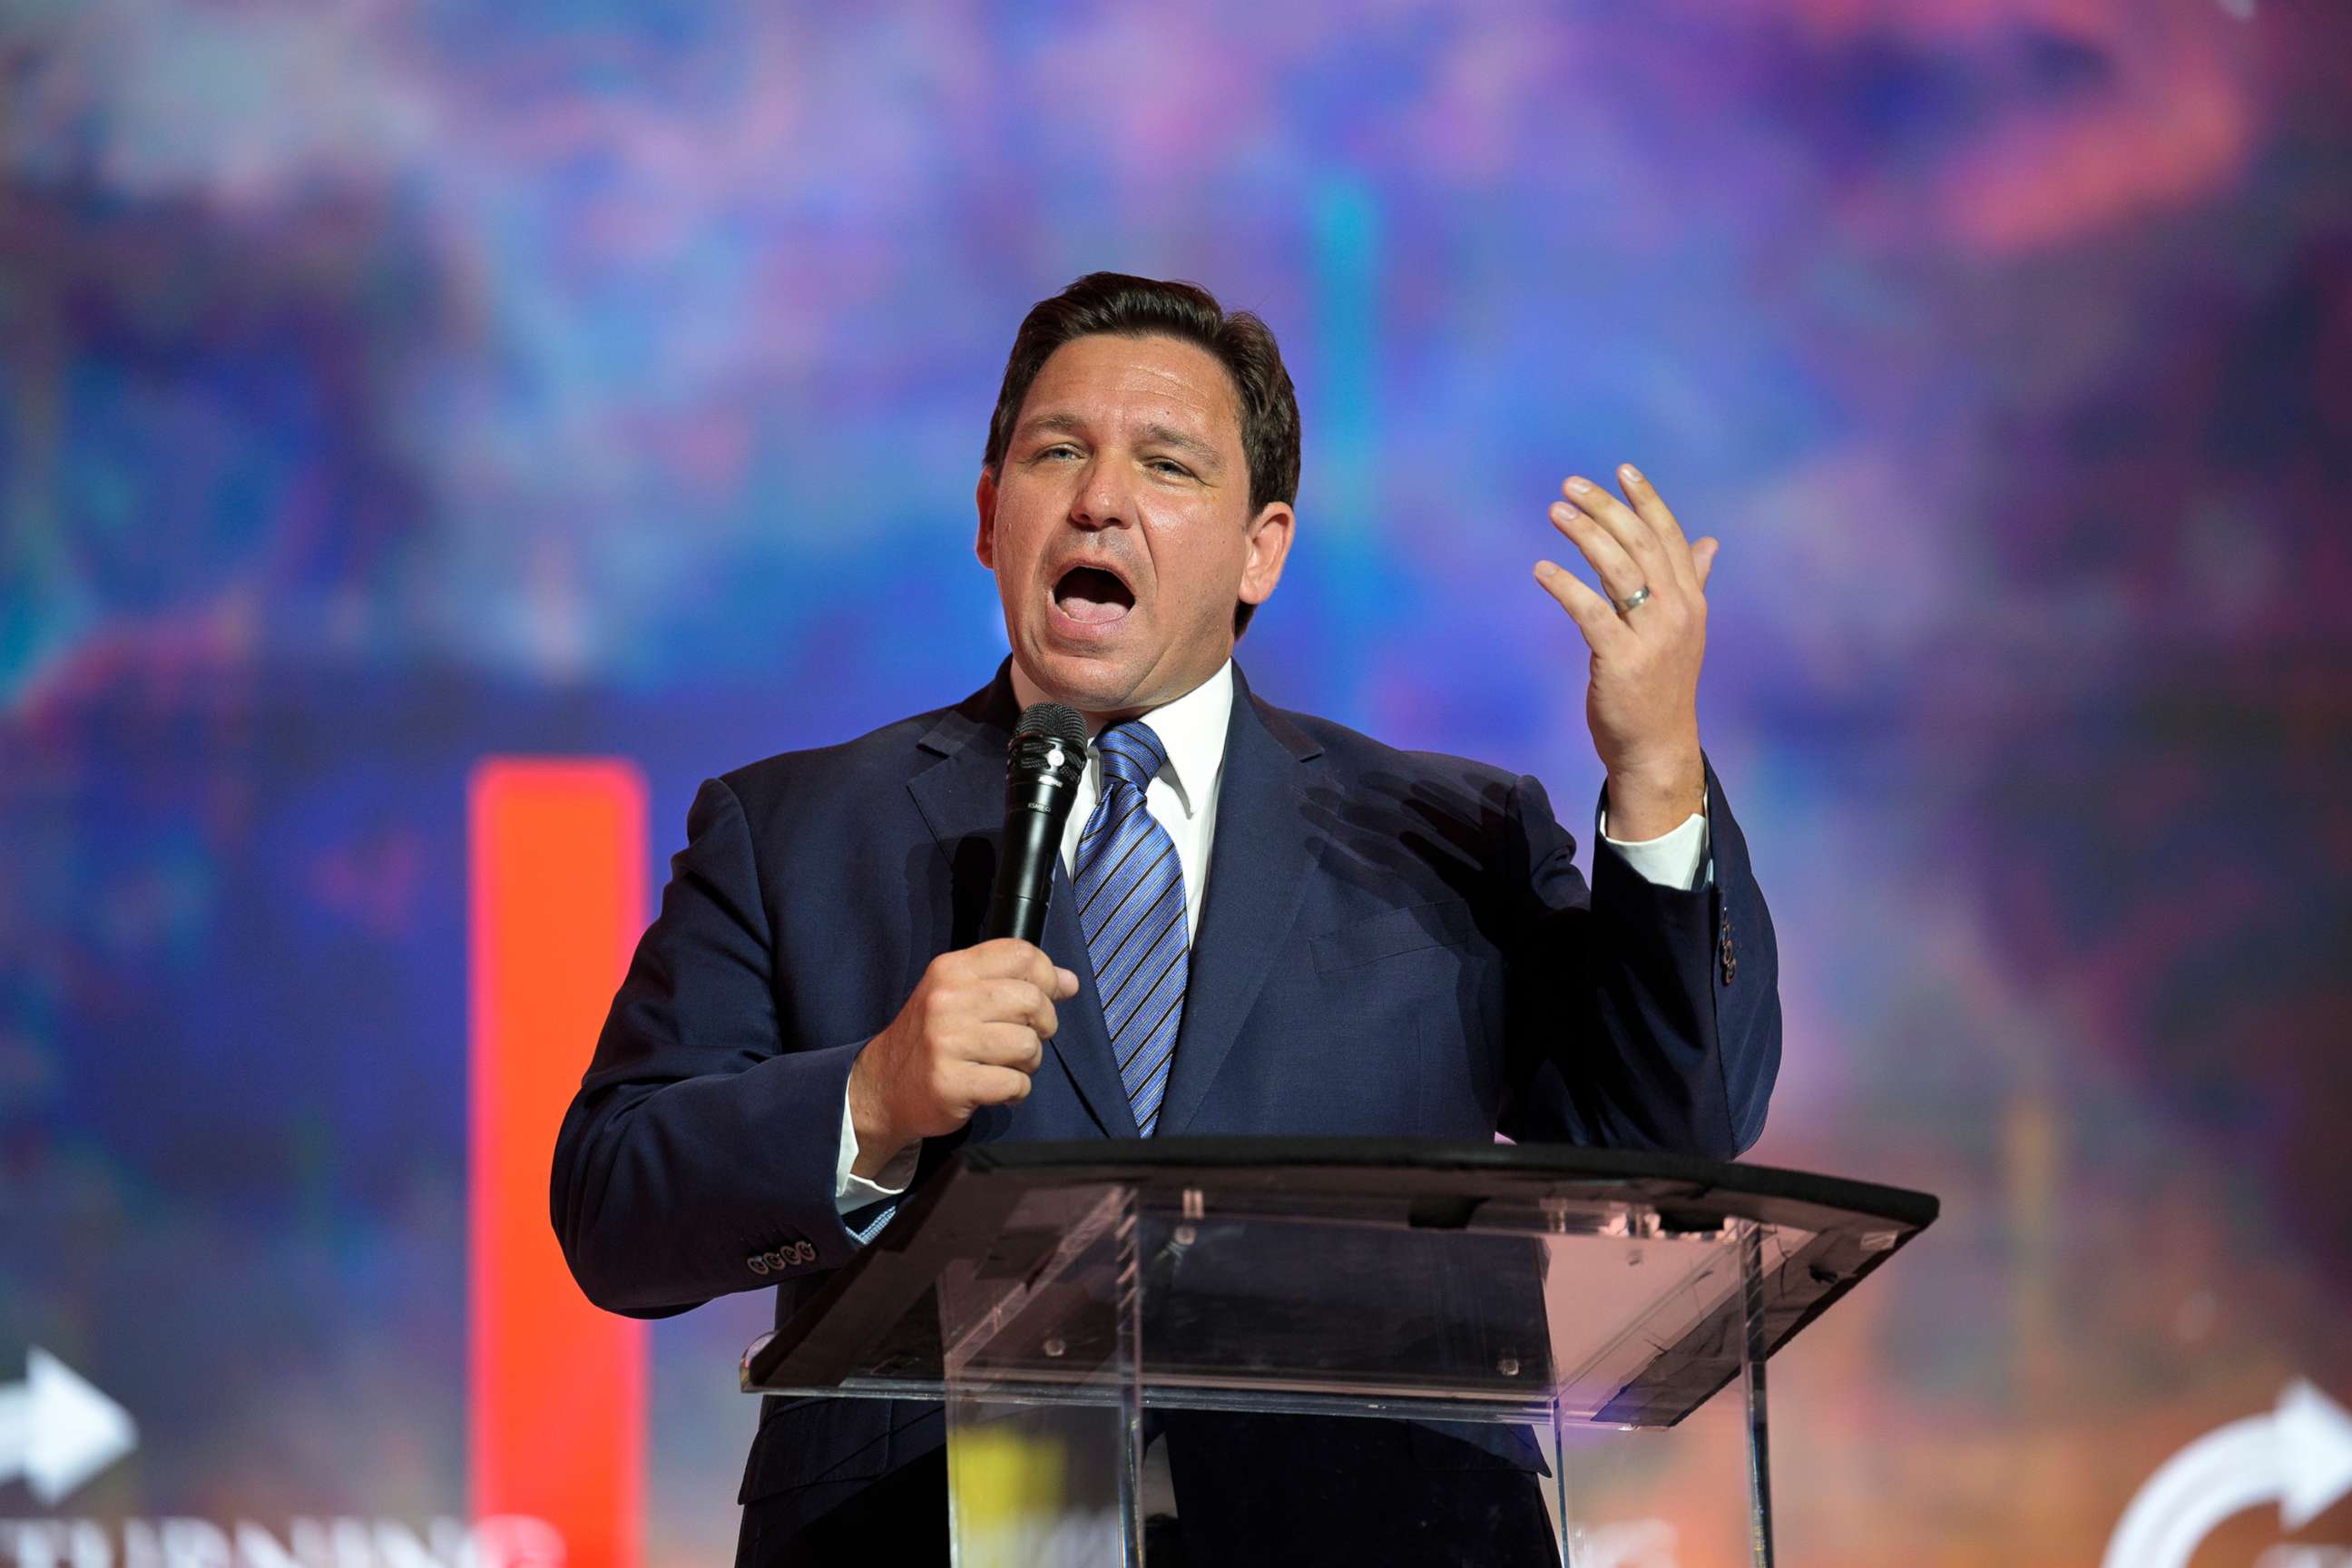 PHOTO: Florida Gov. Ron DeSantis addresses attendees during the Turning Point USA Student Action Summit, on July 22, 2022, in Tampa, Fla.